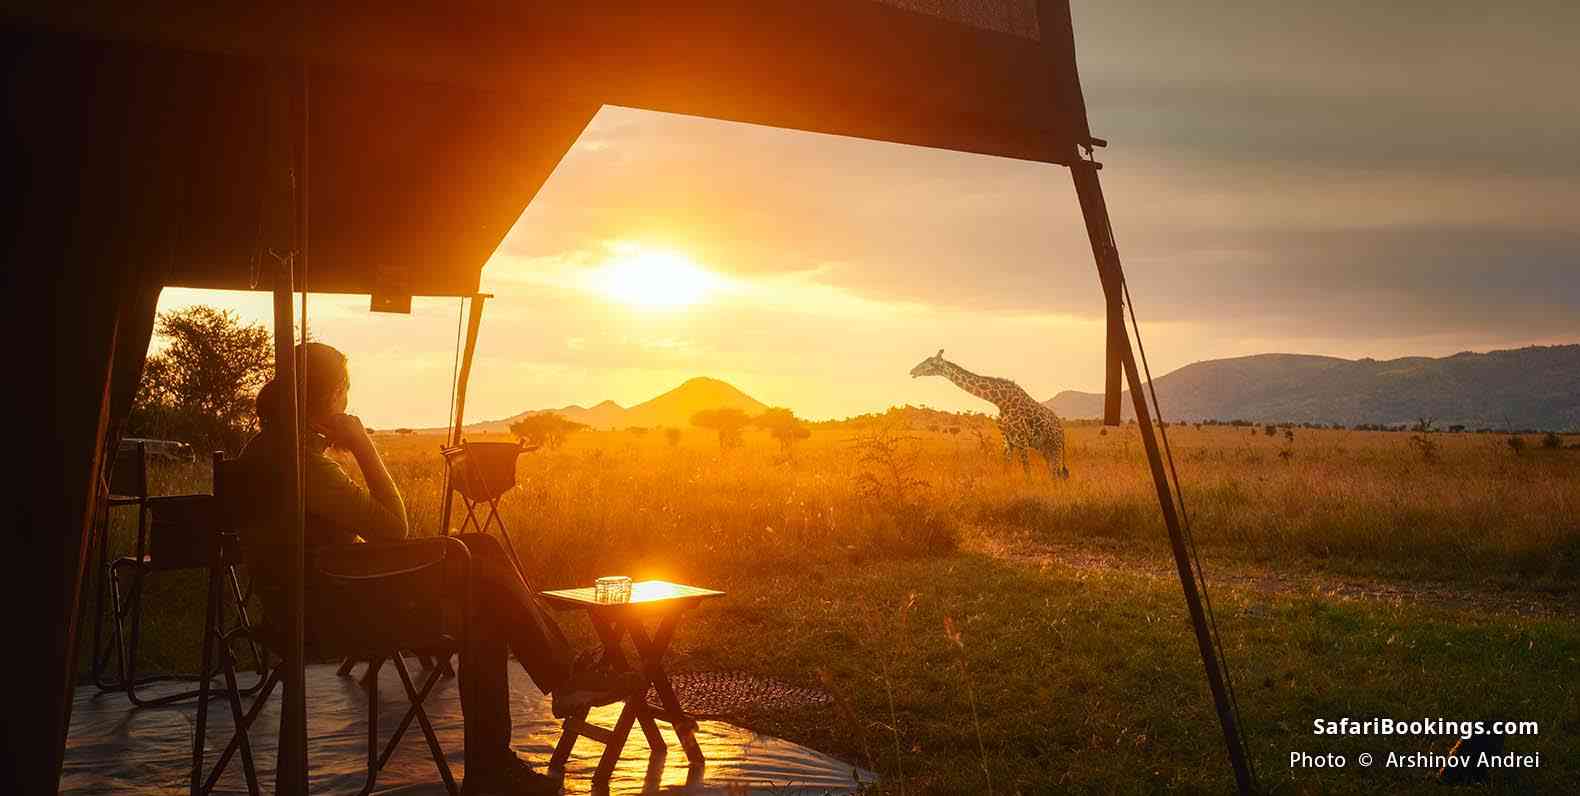 Giraffe walking past a woman in front of her tent at sunset at Serengeti National Park